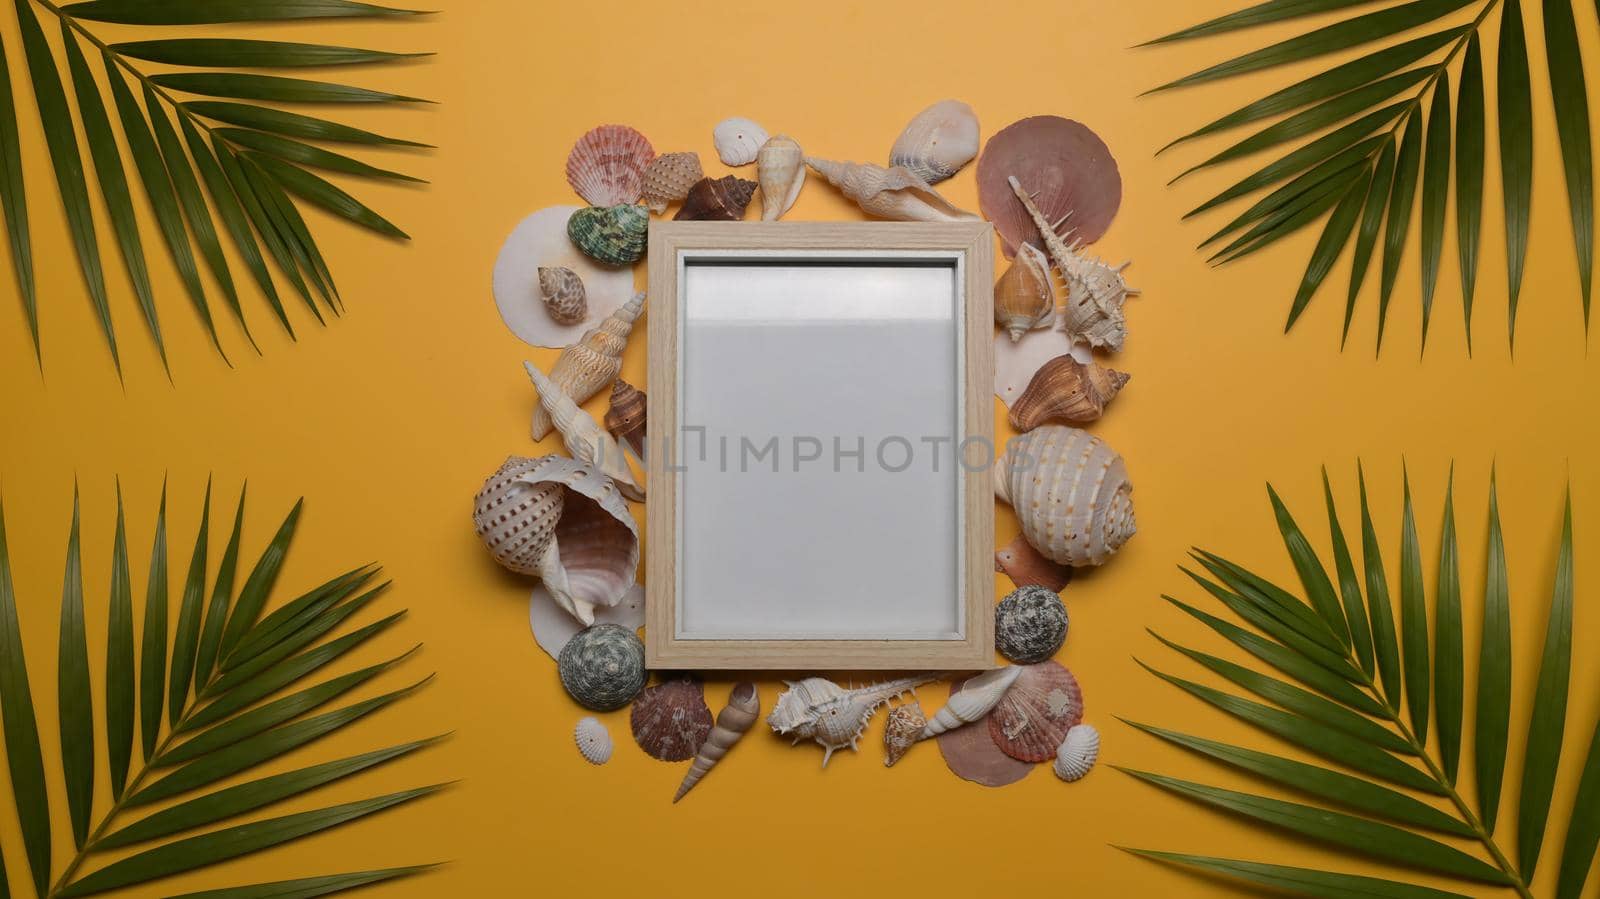 Empty picture frame, seashells and tropical palm leaves on yellow background. Travel, summer and holiday concept. by prathanchorruangsak